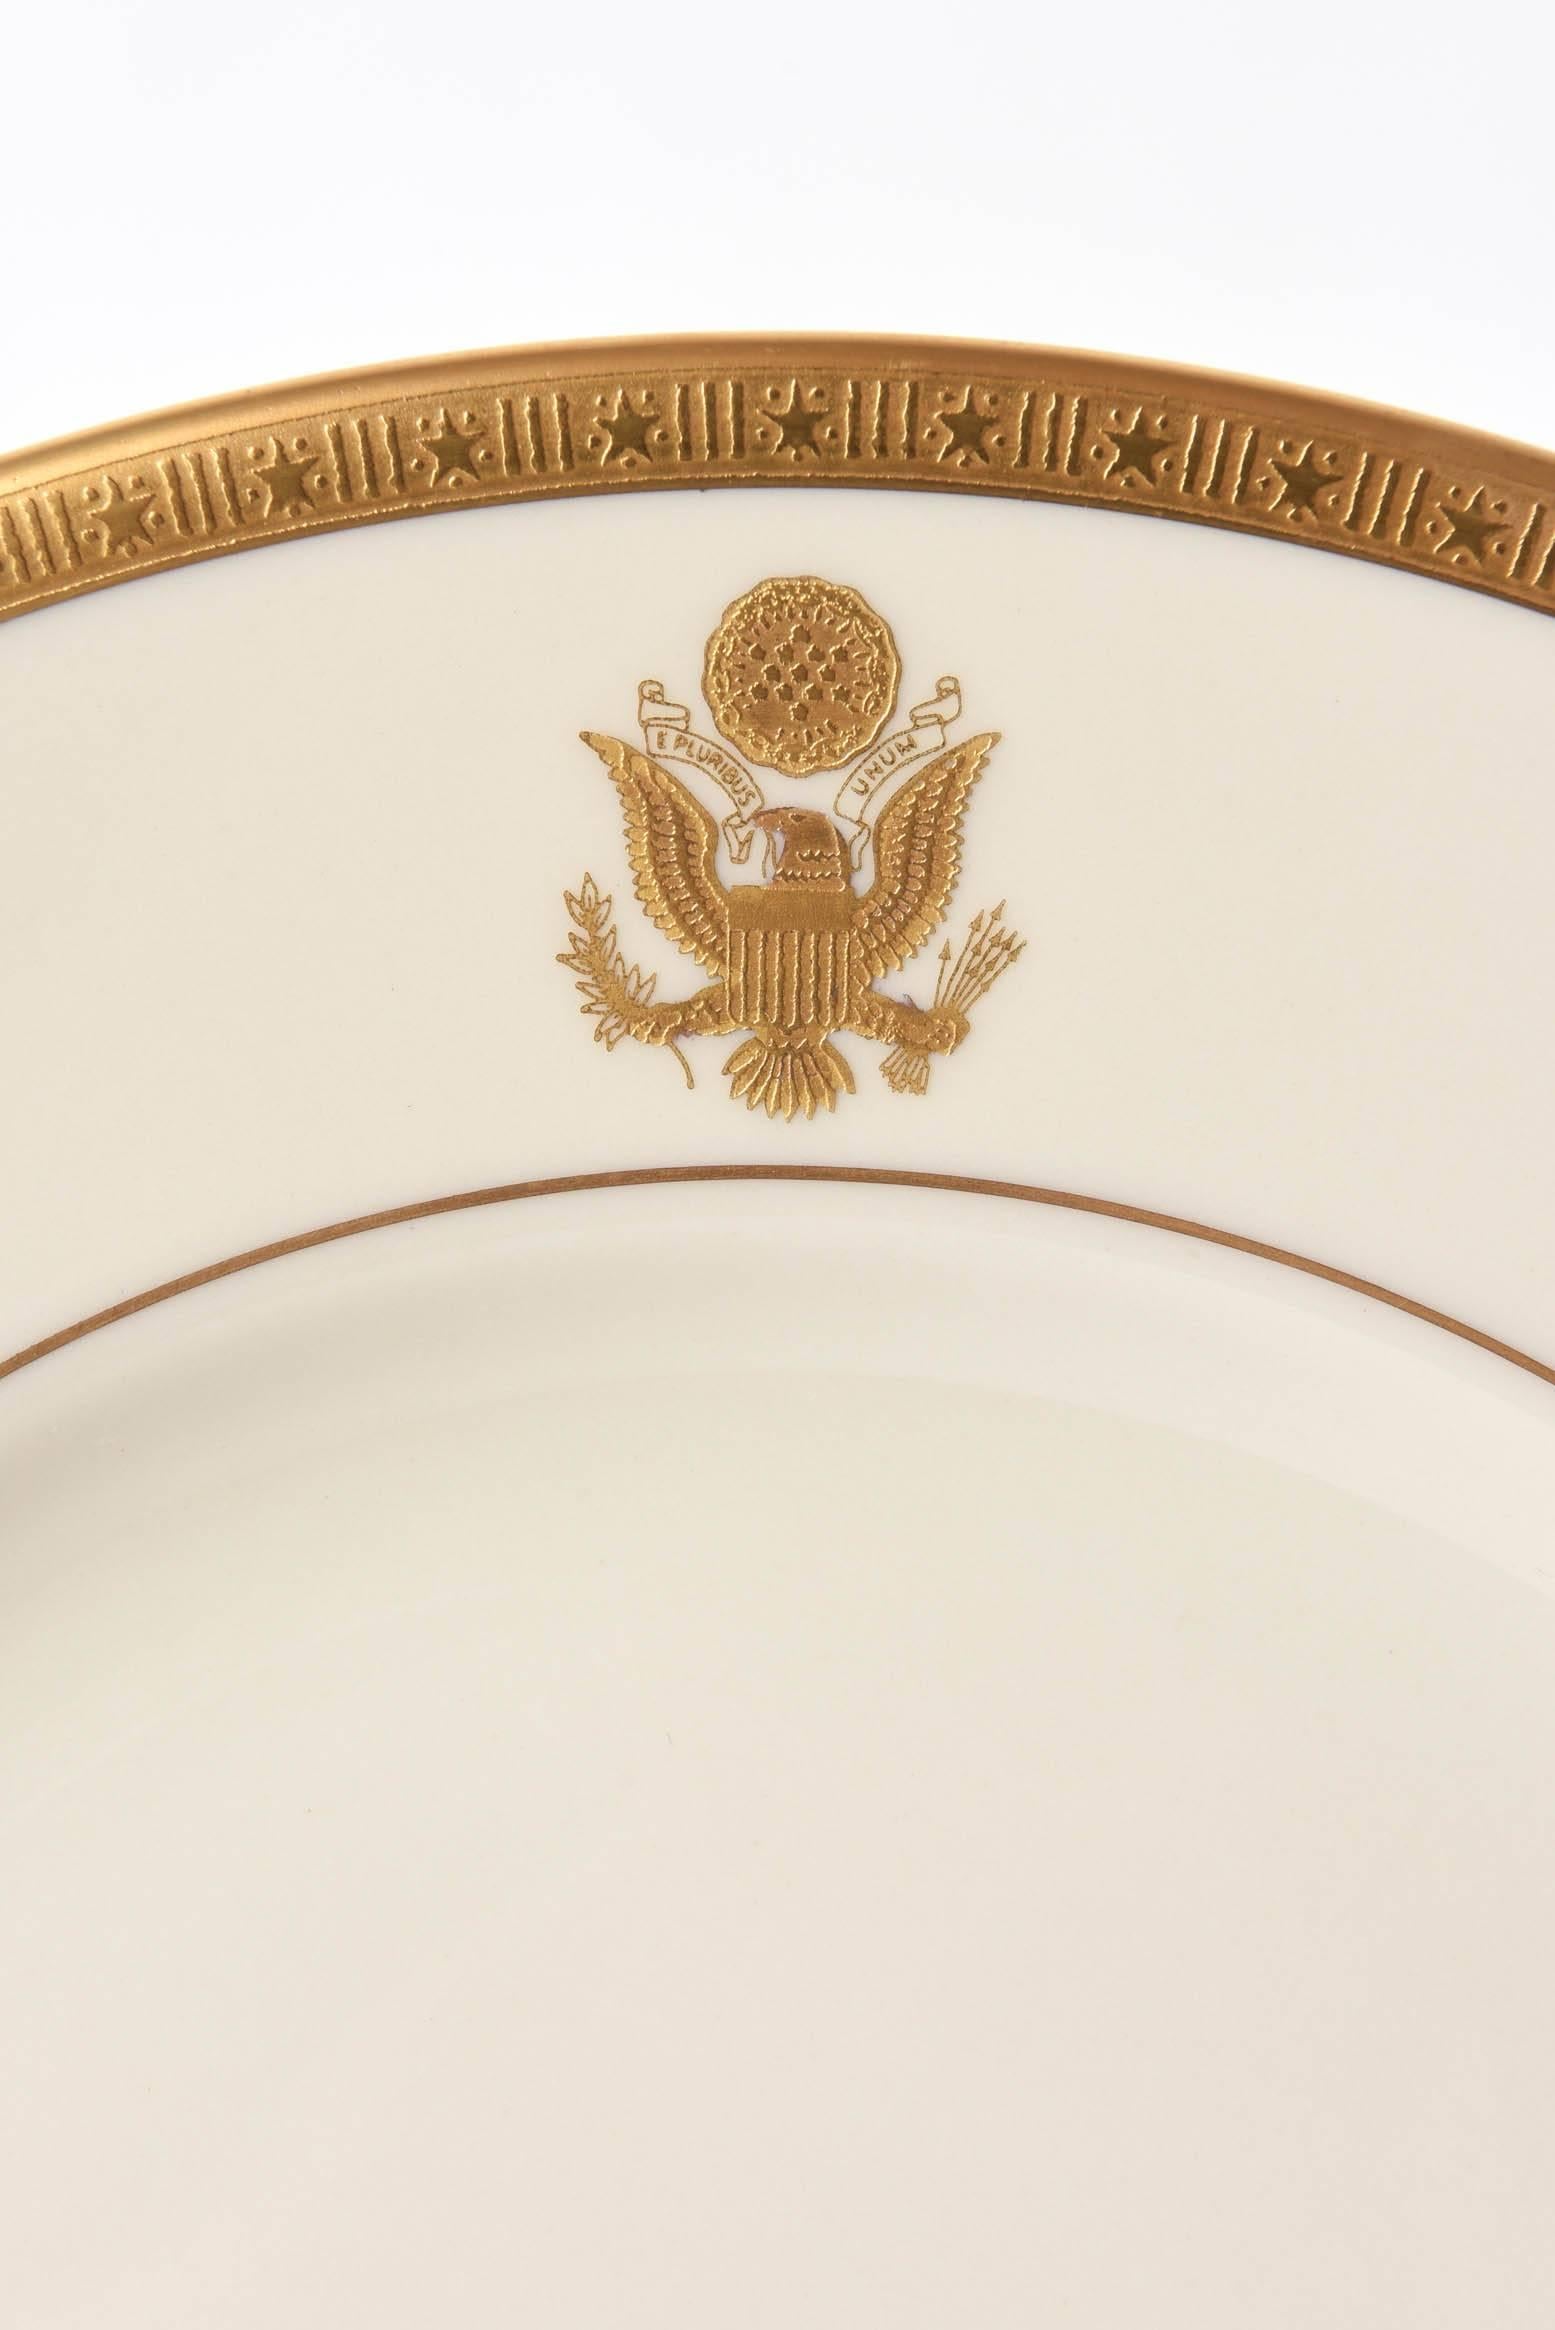 From one of America's premier china manufacturers this plate was re-ordered from the Syracuse China Co, NY during many presidencies including Harding, Coolidge and Hoover. This design took its inspiration from the original Lenox medallion of 1918